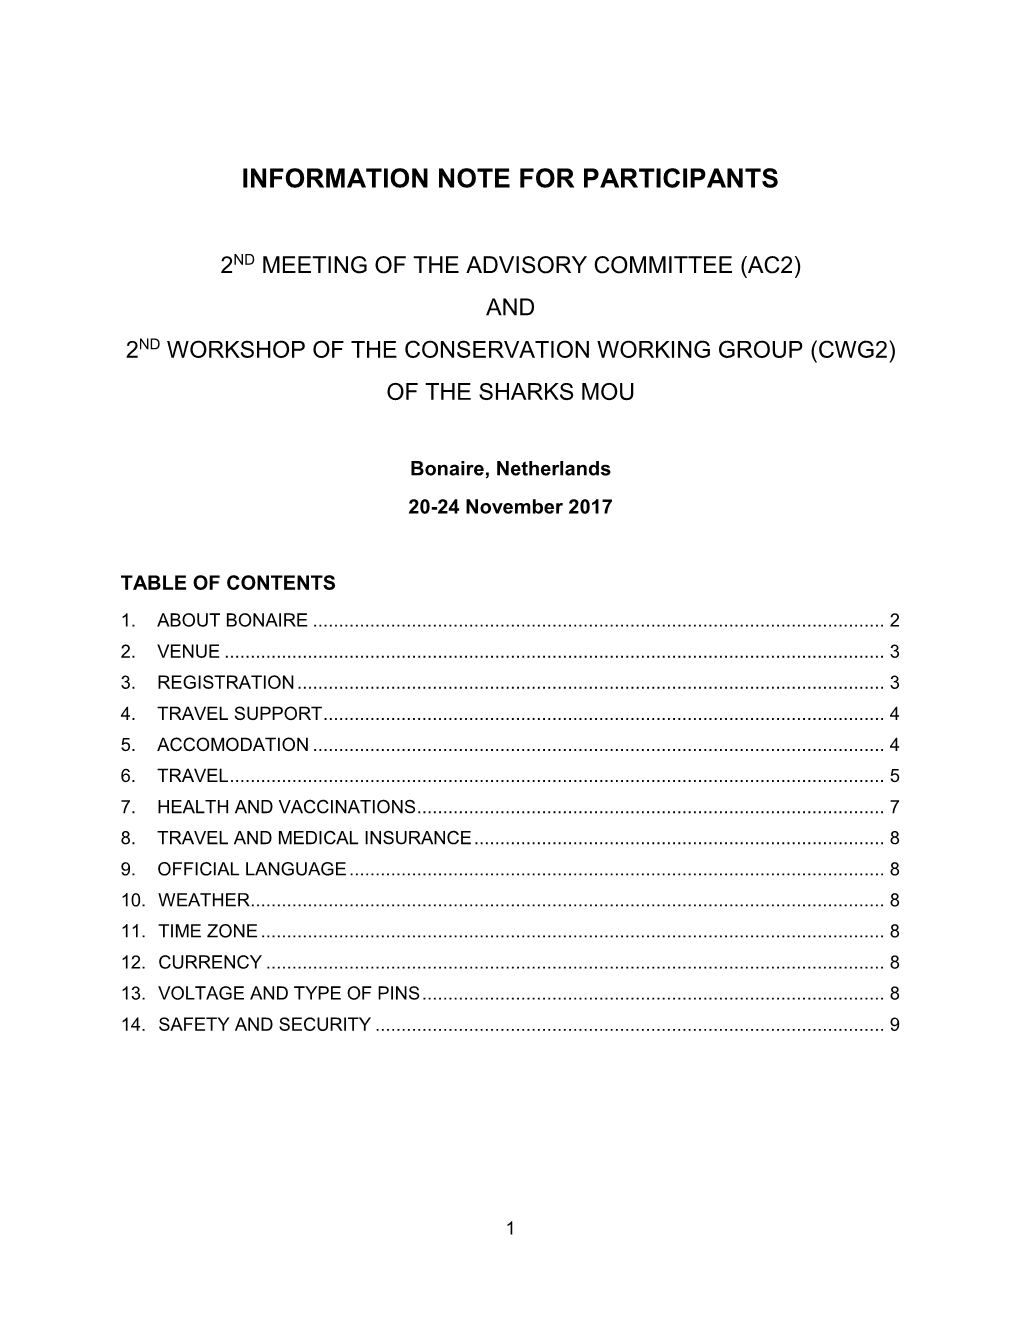 AC2 CWG2 Information Note for Participants.Pdf